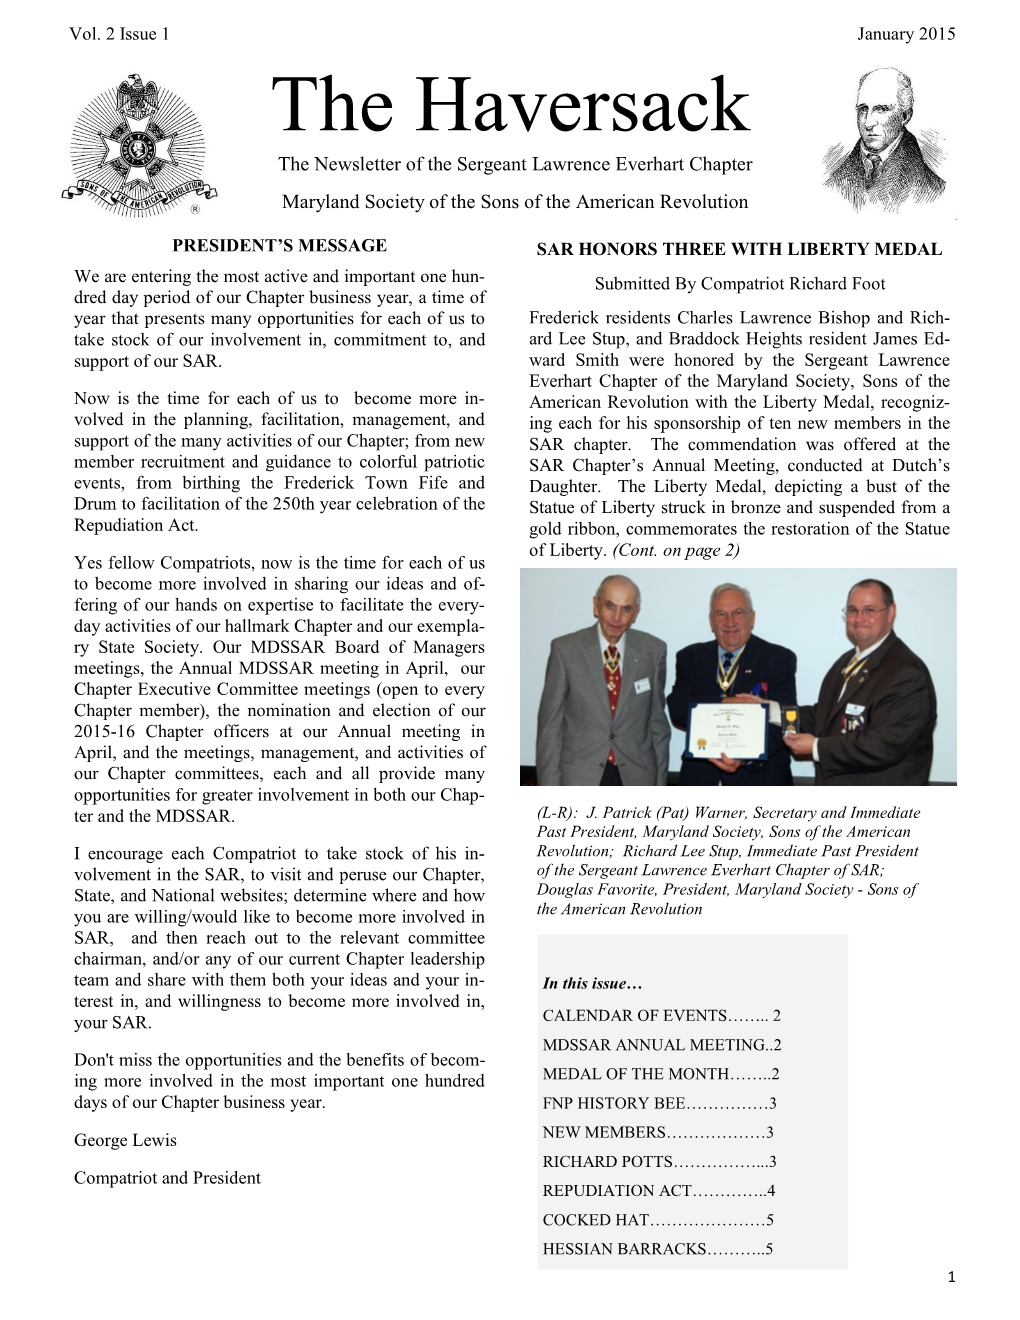 The Haversack the Newsletter of the Sergeant Lawrence Everhart Chapter Maryland Society of the Sons of the American Revolution